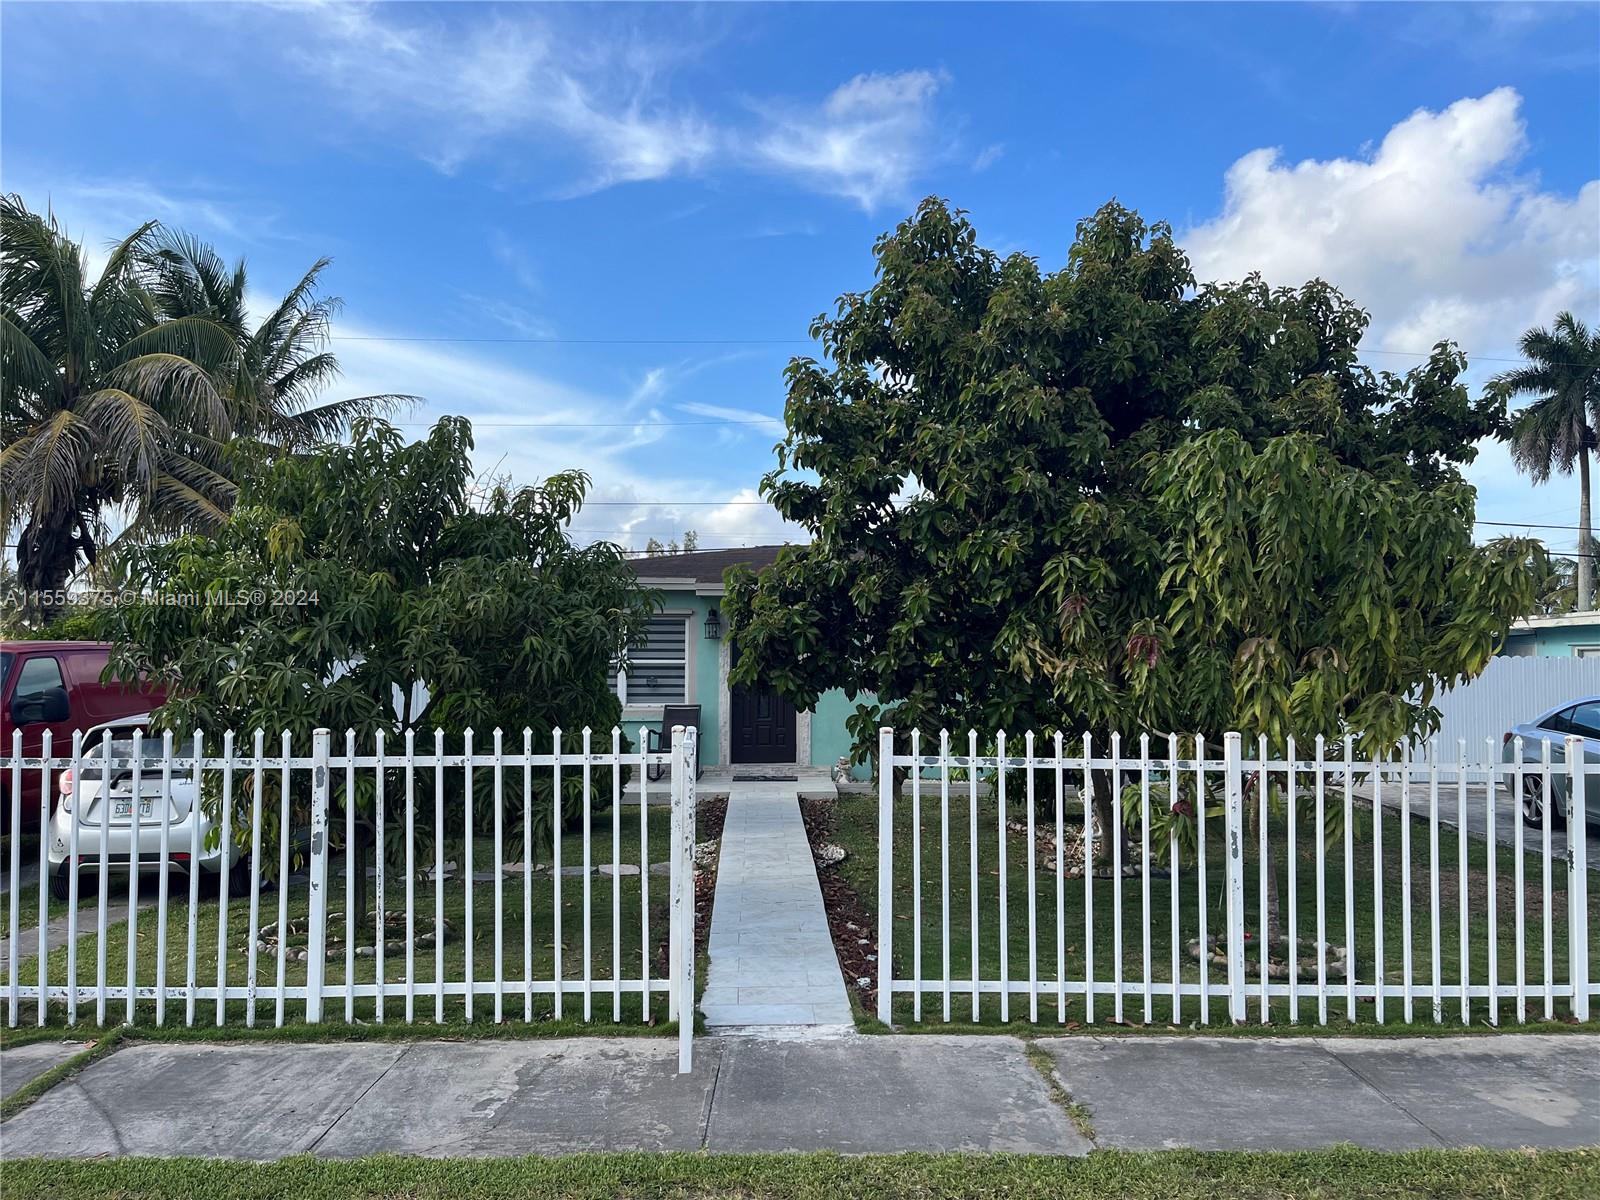 Great Location and Potential Home 3 Bed/2 Baths, one room has a separate entrance; all fenced with private yard, has operating well water for your convenience. 2 sheds, fruit trees with great spaces for RV or boat. Close to many shopping, schools and turnpike. No HOA